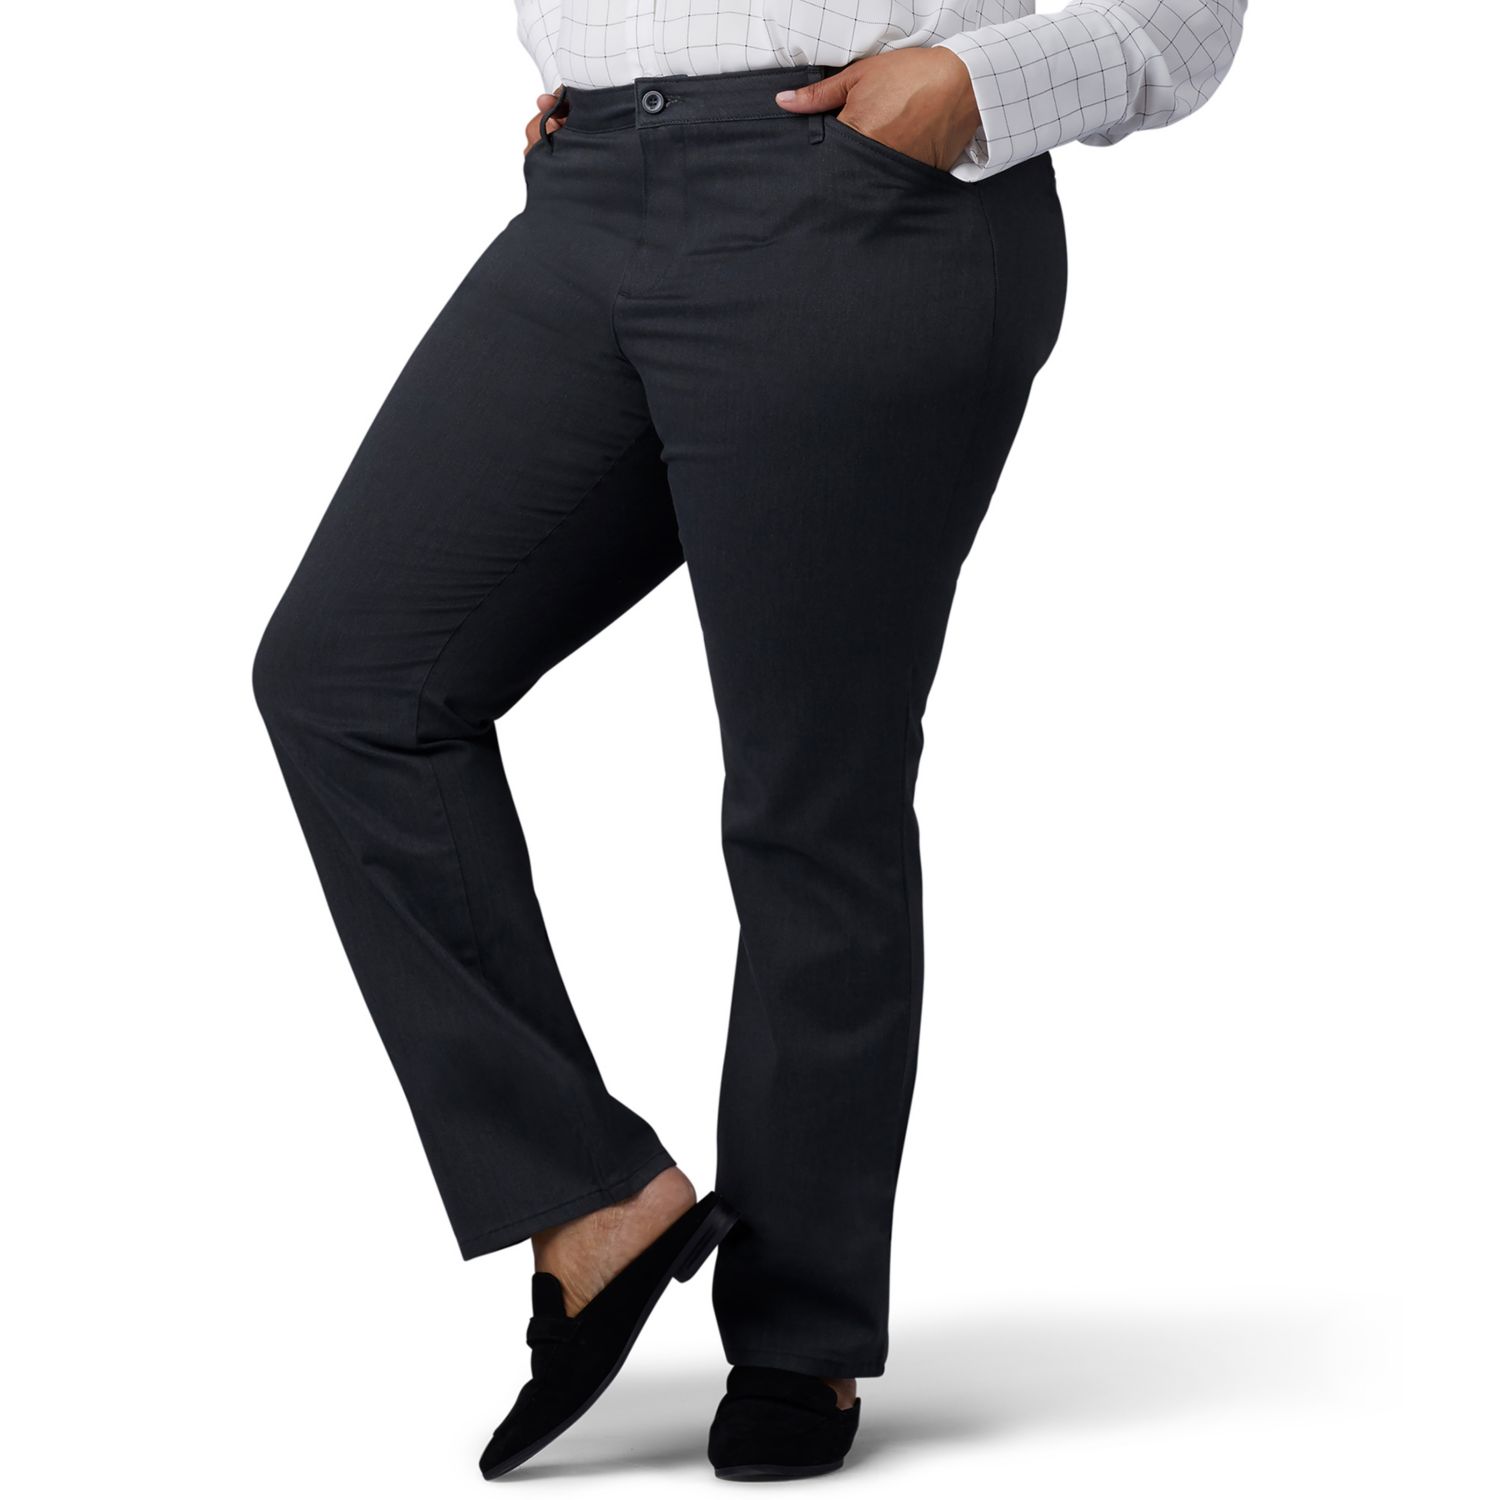 Image for Lee Plus Size Relaxed Fit Straight-Leg Pants at Kohl's.